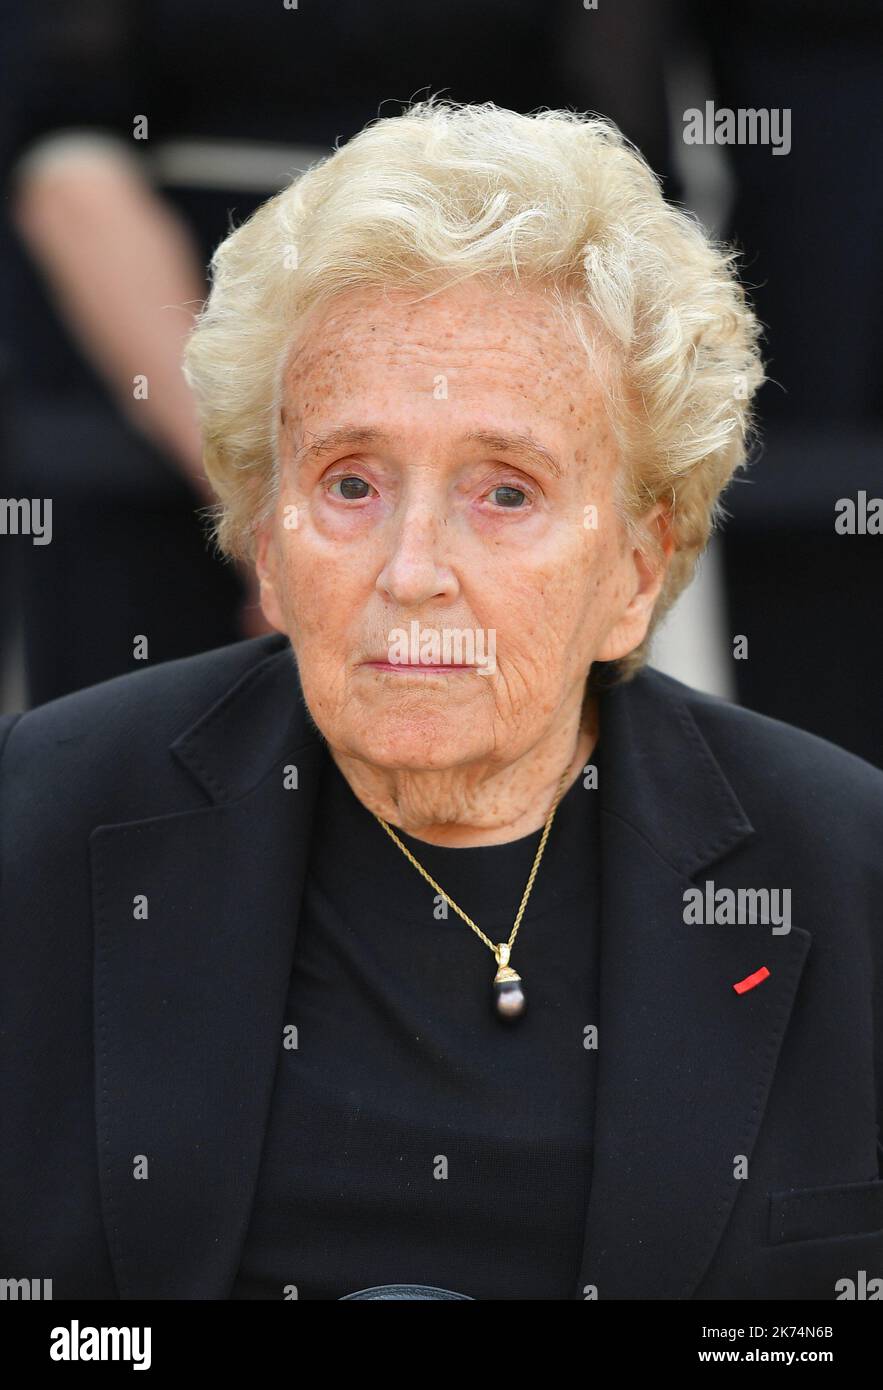 Bernadette Chirac during the funeral ceremony for Simone Veil, in the courtyard of the Invalides in Paris, France, 05 July 2017. Holocaust survivors are joining France's president and European dignitaries at a special memorial ceremony for Simone Veil, who rose from the horrors of Nazi death camps to become president of the European Parliament and one of France's most revered politicians LTG Stock Photo